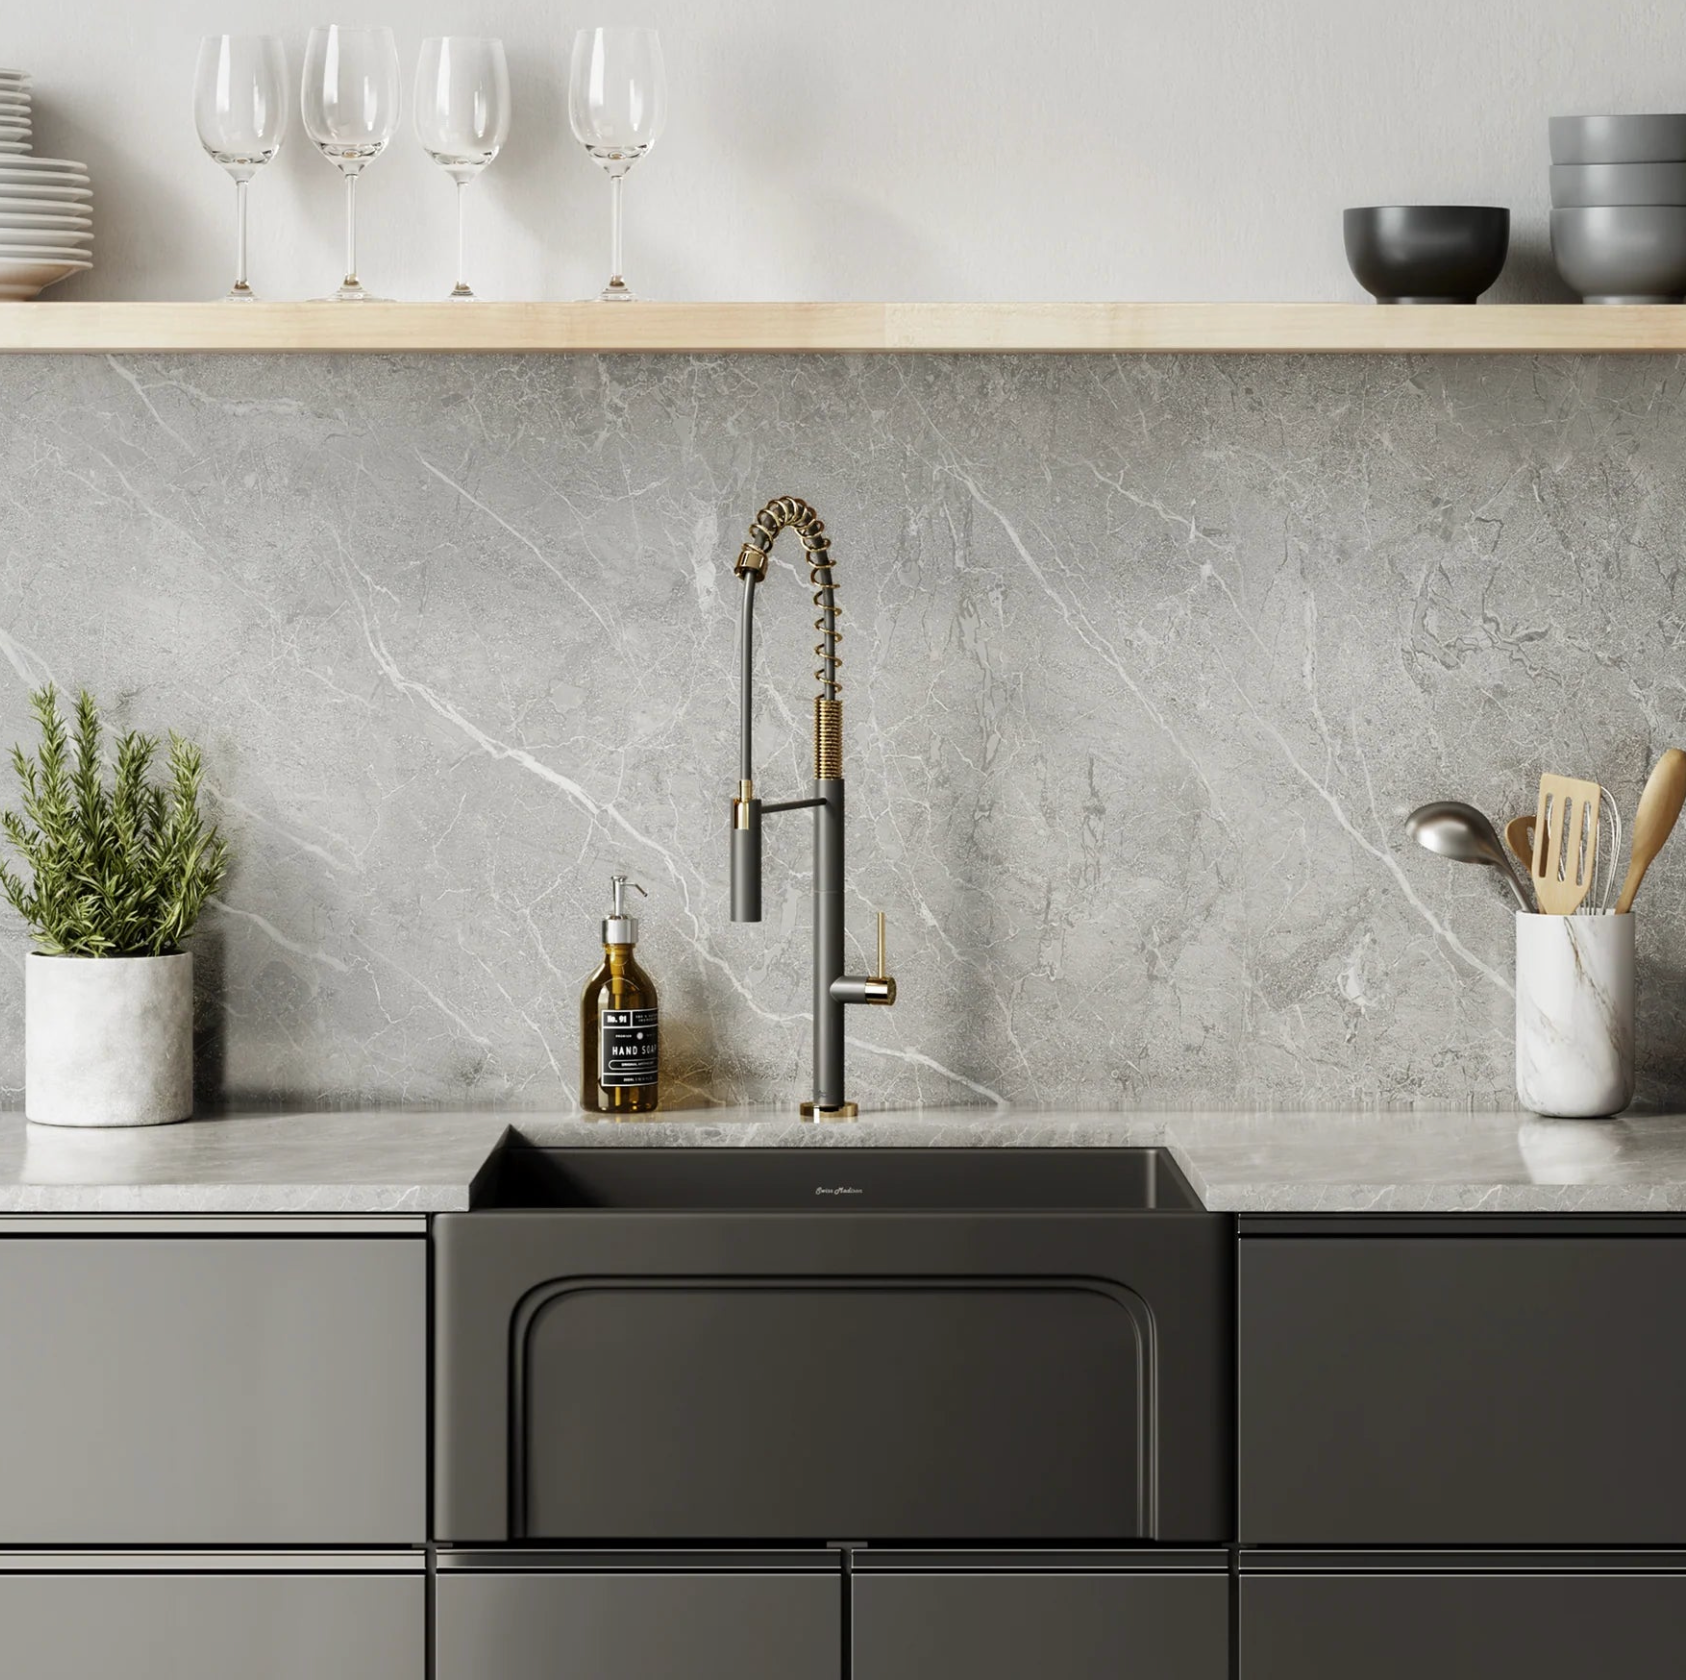 Enhance Your Kitchen Experience with Swissmadison Sinks: A Fusion of Style and Practicality